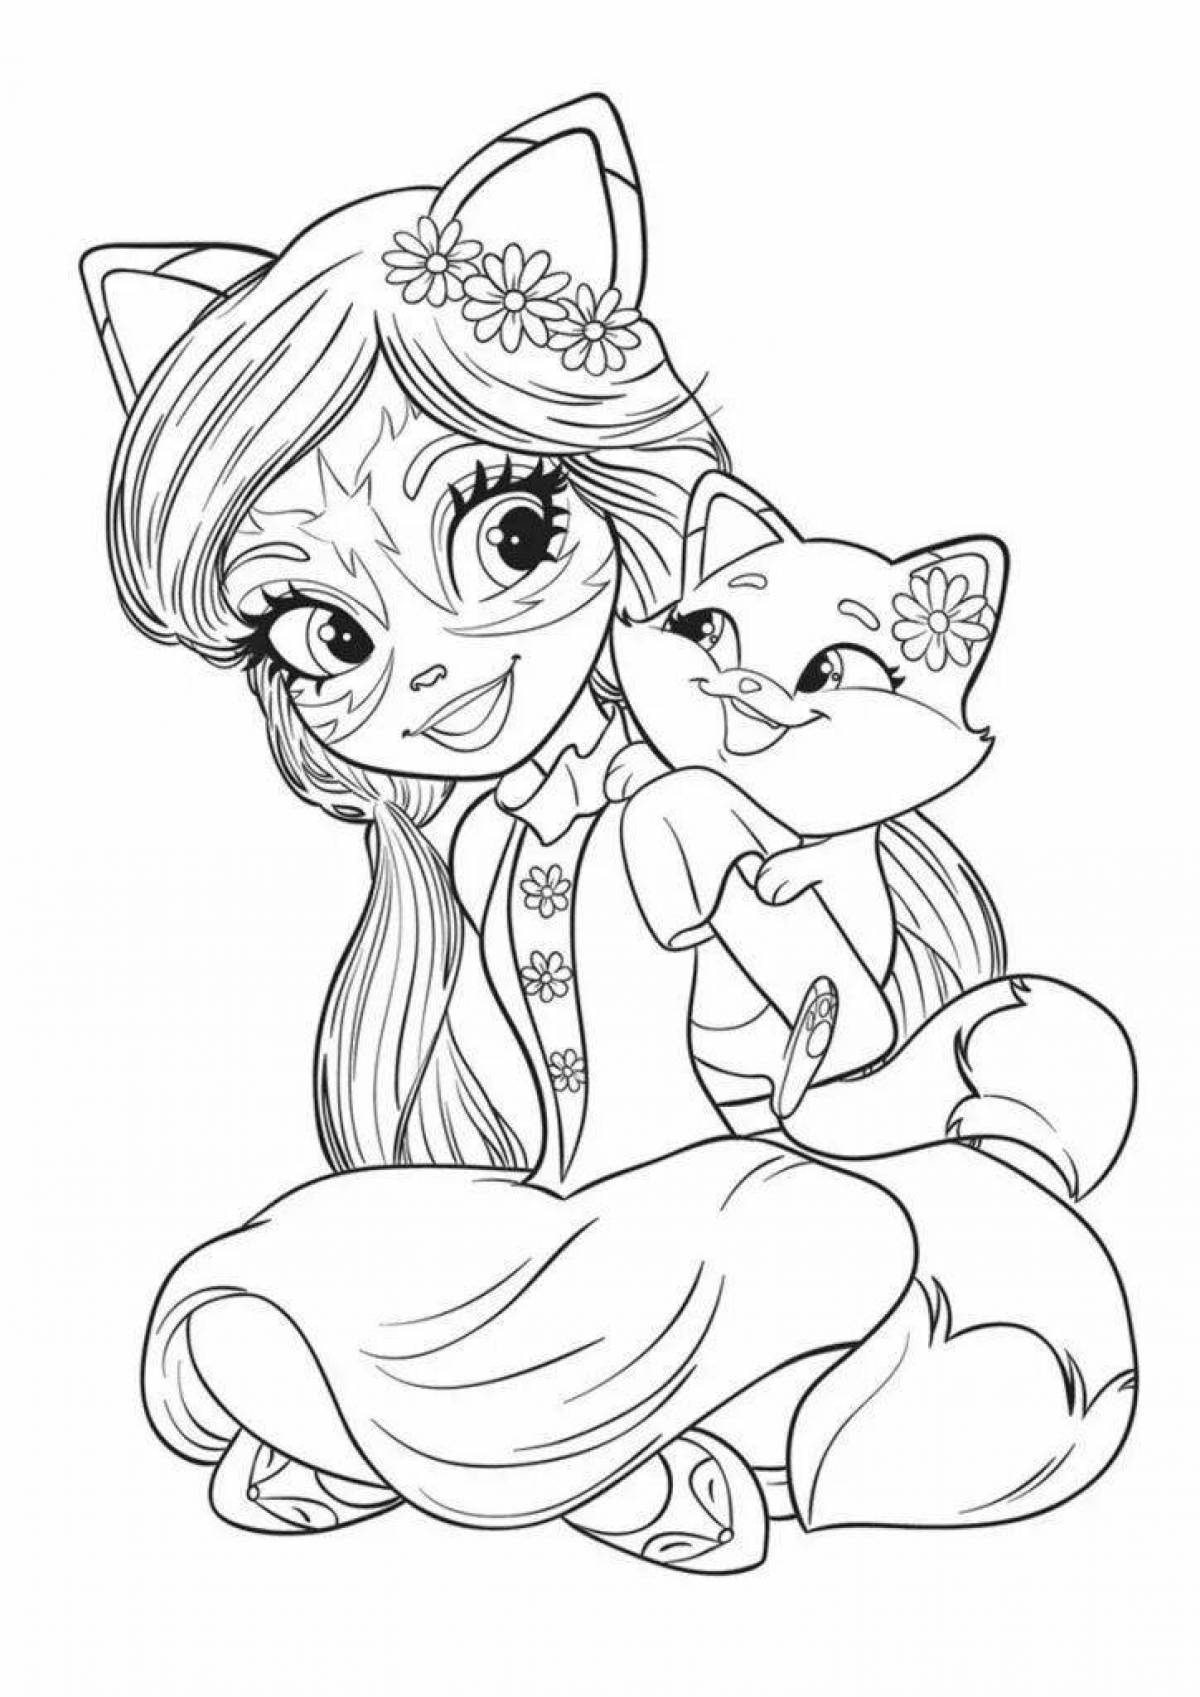 Fancy coloring pages enchancimals